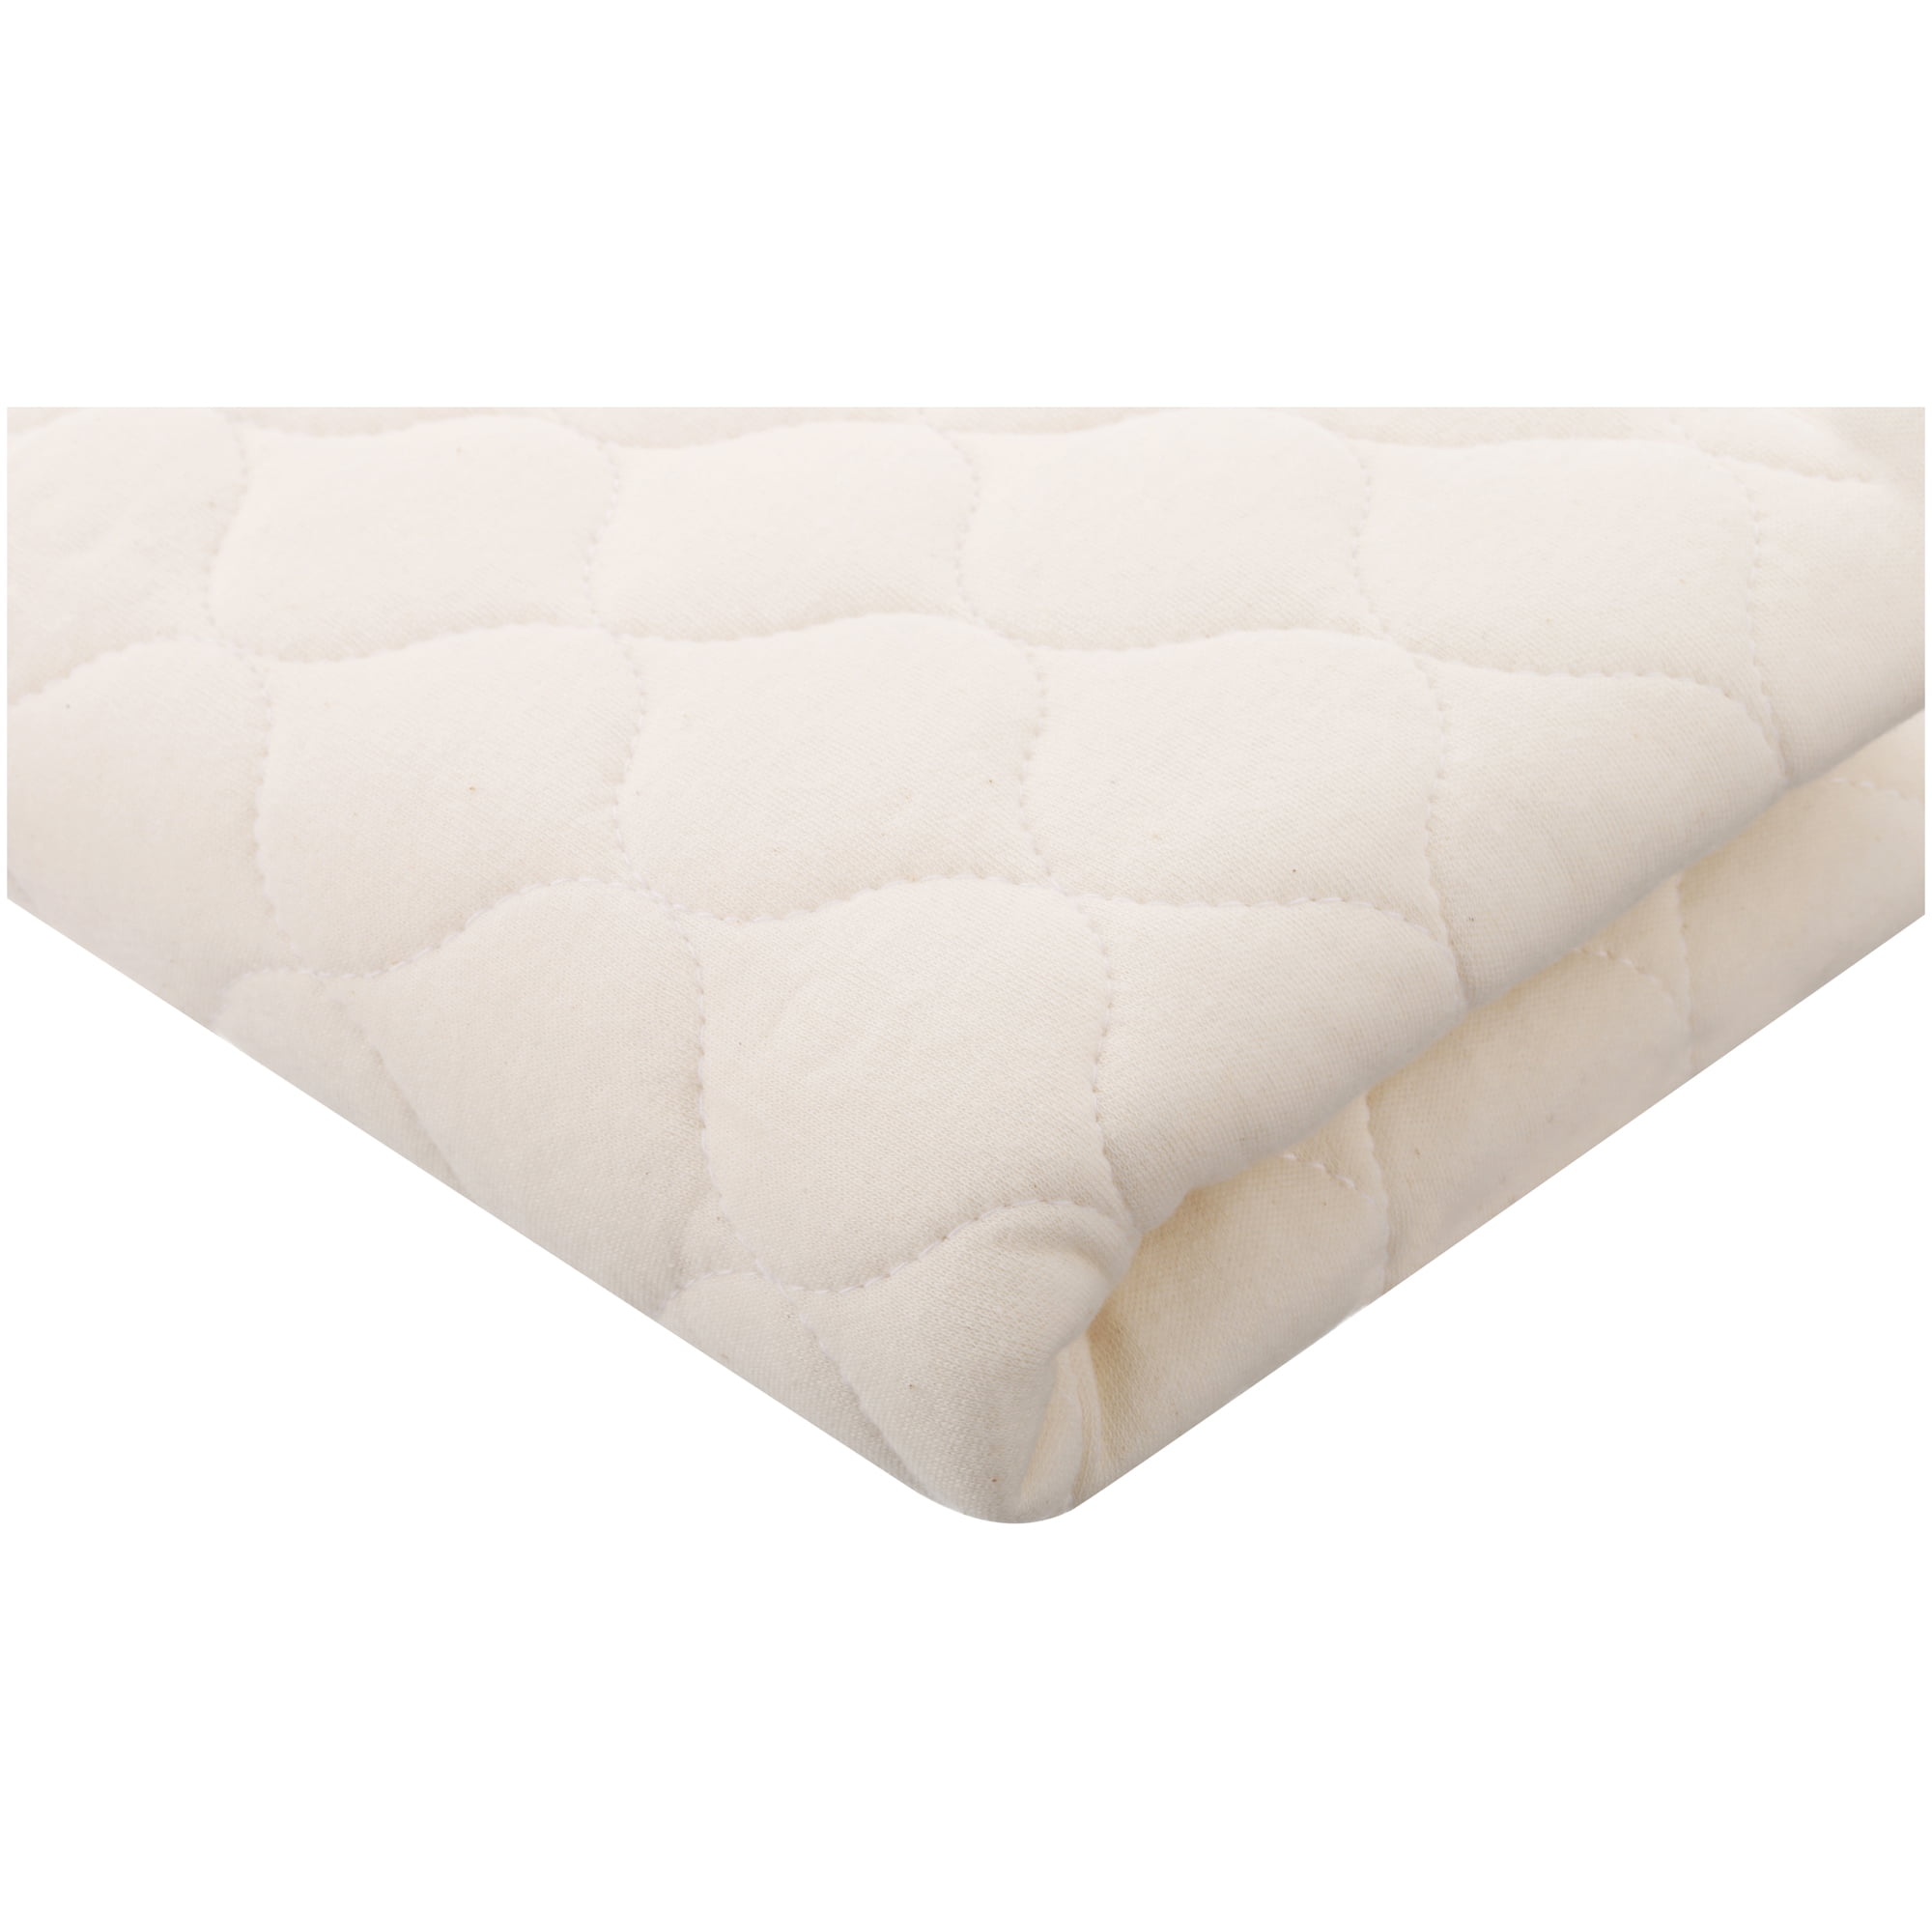 American Baby Company Waterproof Quilted Sheet Saver Pad, Changing Pad Liner  Made with Organic Cotton Top Layer, Natural Color 